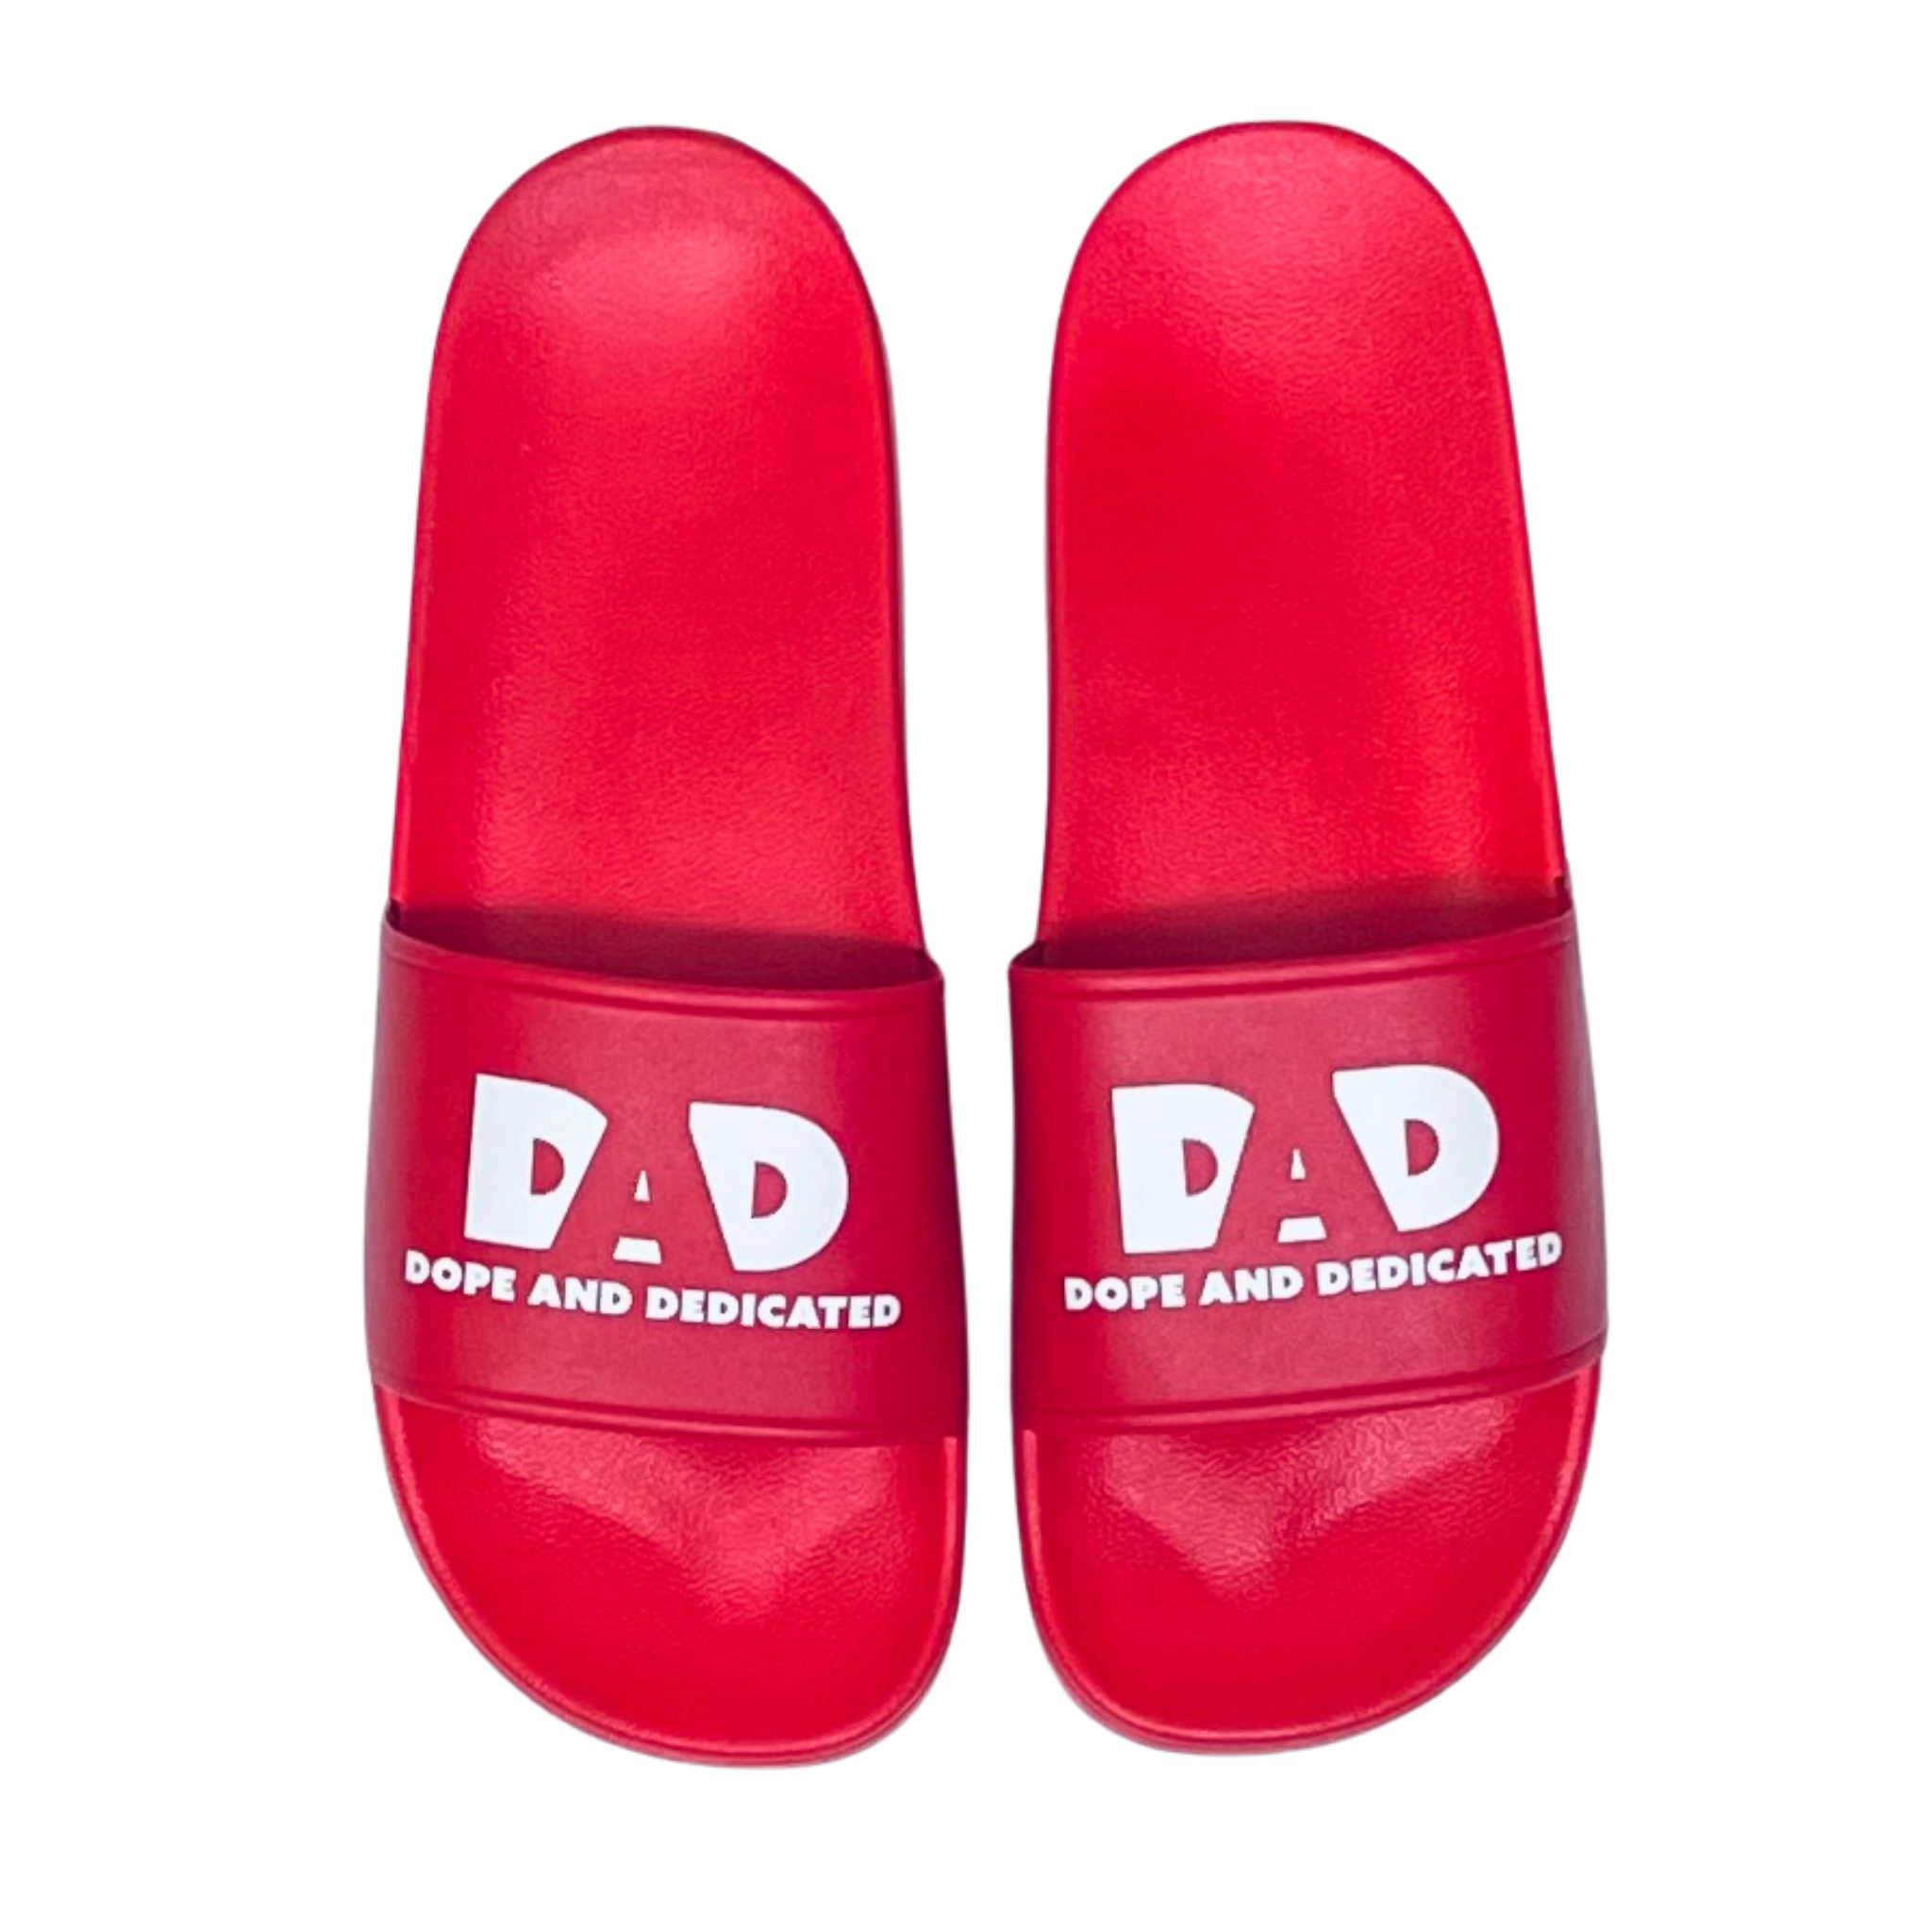 Dope Dad Slides - Red - Dope And Dedicated